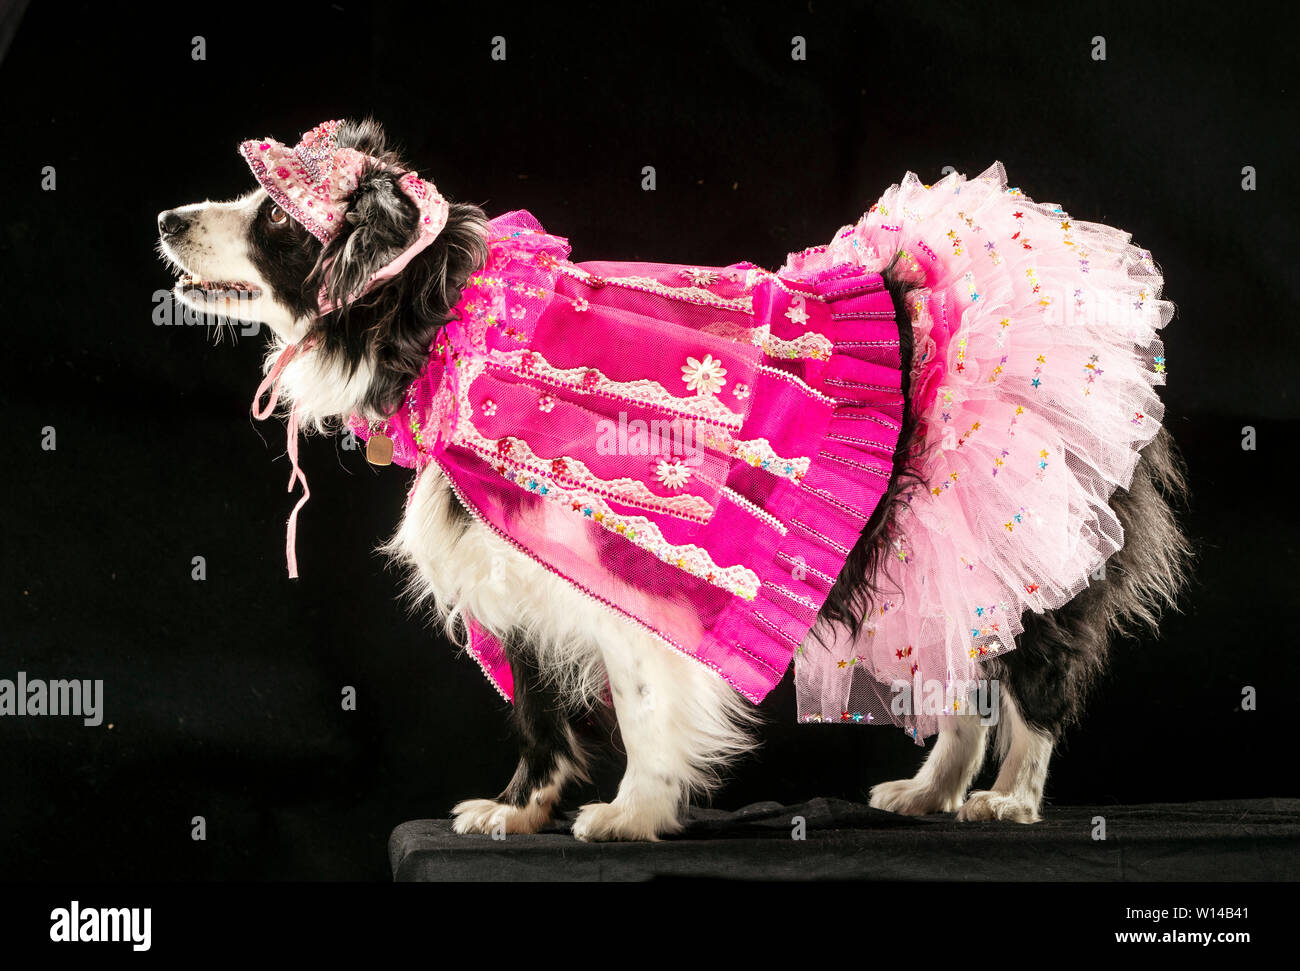 https://c8.alamy.com/comp/W14B41/magic-the-border-collie-dog-wearing-a-ladies-day-at-the-races-themed-dress-during-the-furbabies-dog-show-in-wetherby-yorkshire-W14B41.jpg